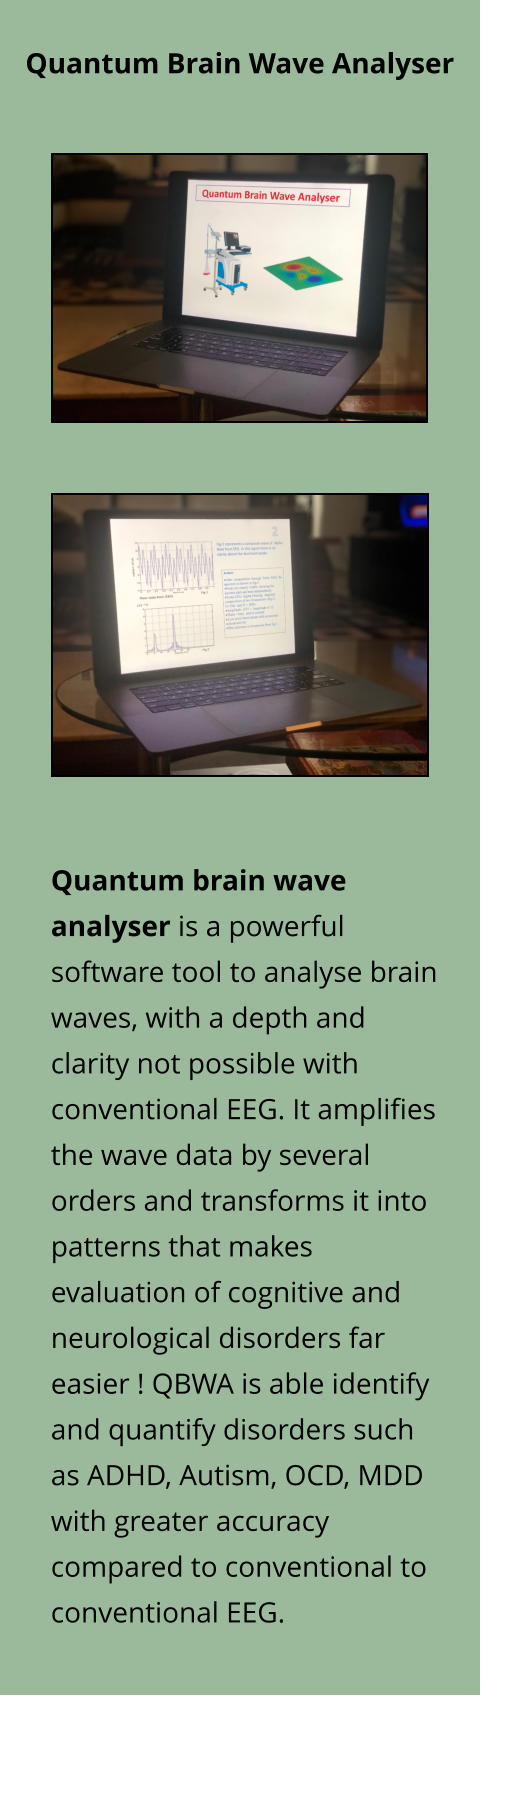 Quantum Brain Wave Analyser Quantum brain wave analyser is a powerful software tool to analyse brain waves, with a depth and clarity not possible with conventional EEG. It amplifies the wave data by several orders and transforms it into patterns that makes evaluation of cognitive and neurological disorders far easier ! QBWA is able identify and quantify disorders such as ADHD, Autism, OCD, MDD with greater accuracy compared to conventional to conventional EEG.